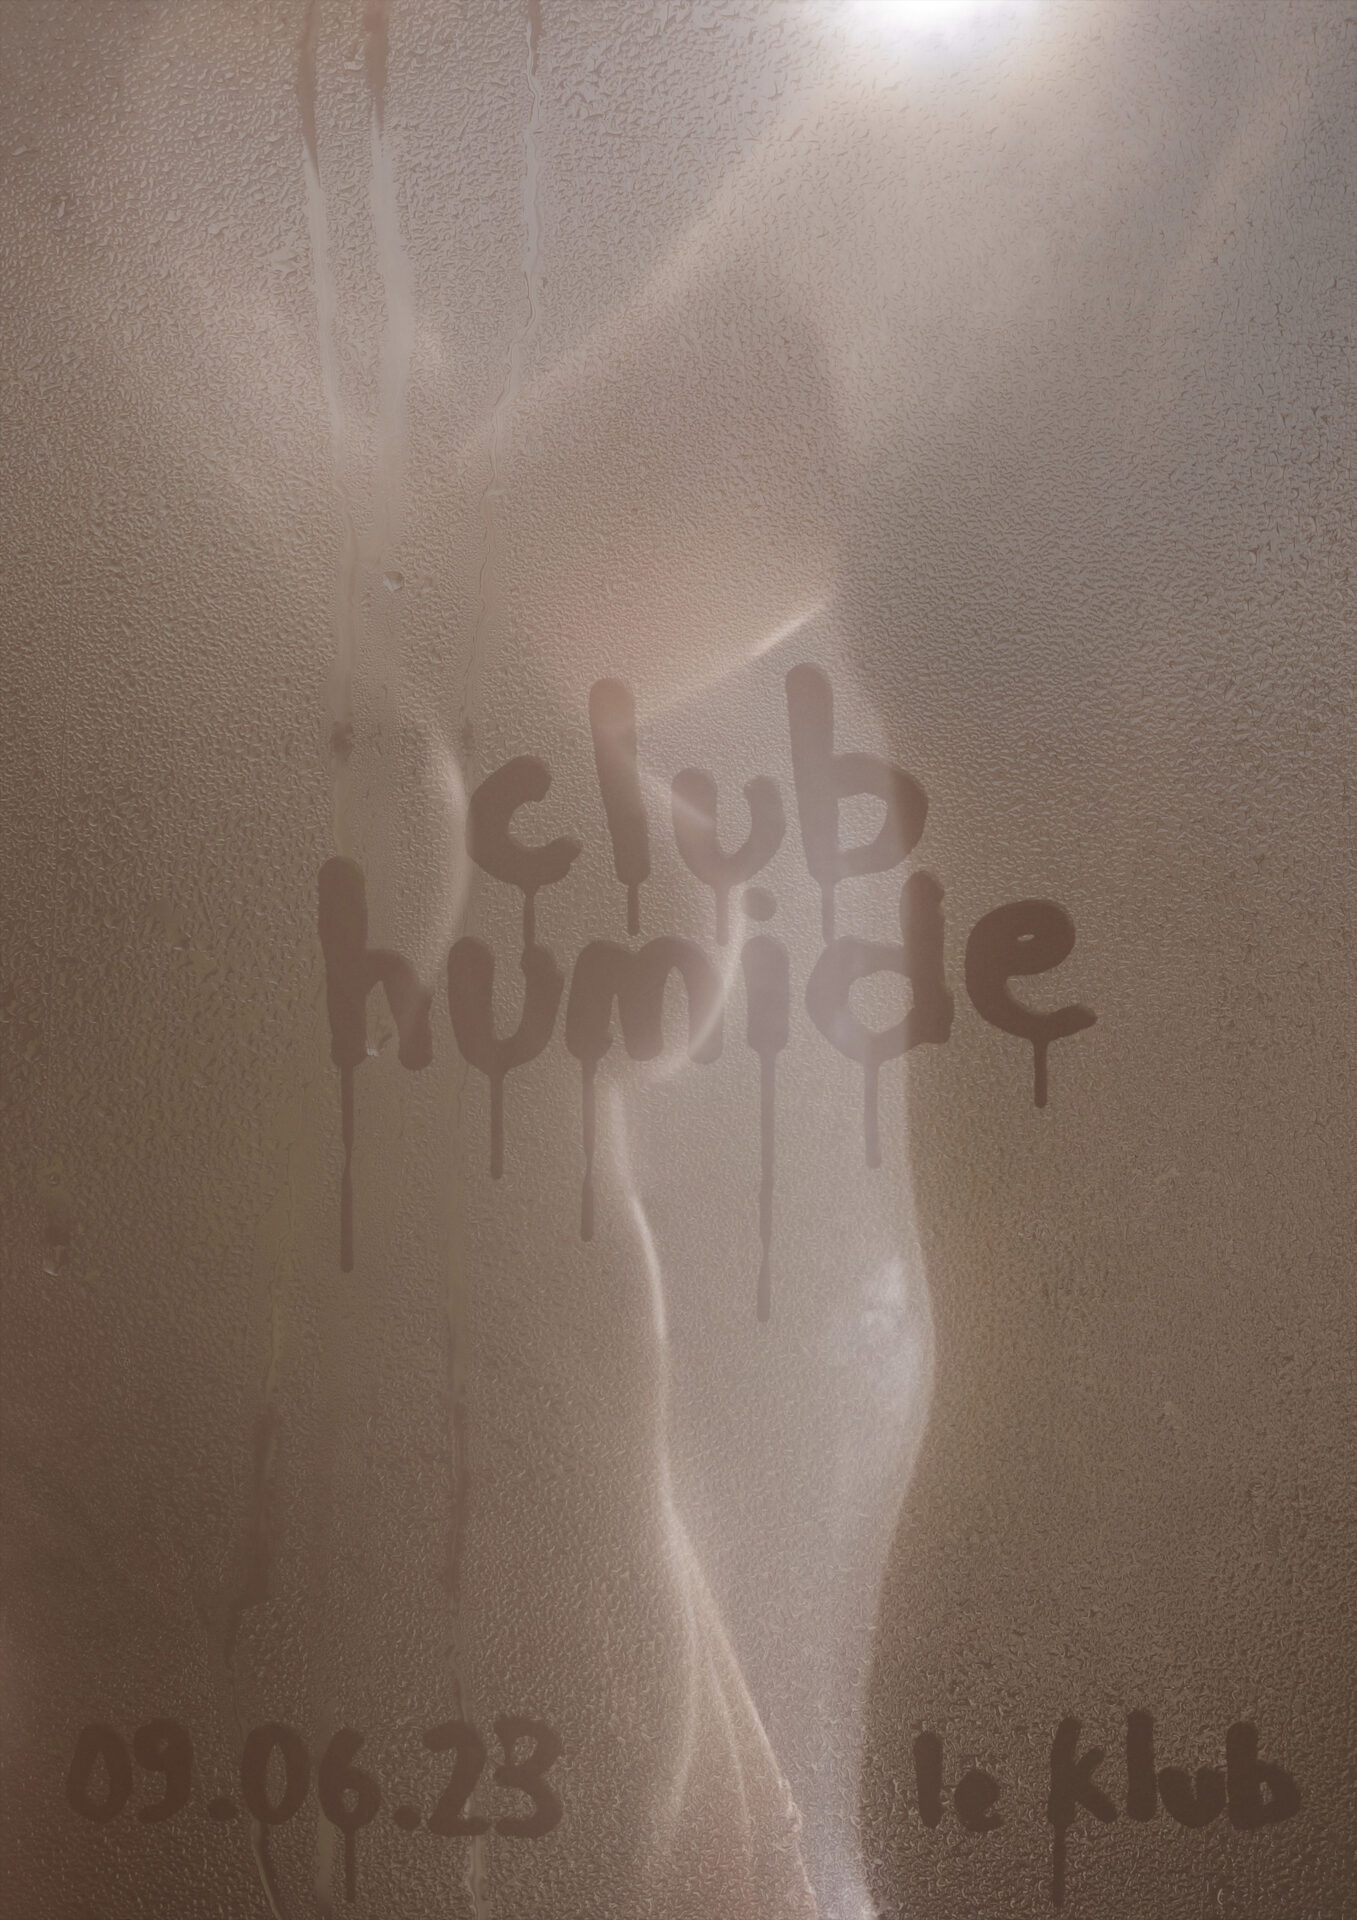 Club Humide: Raviving the Intimacy of Pre-Covid Nights